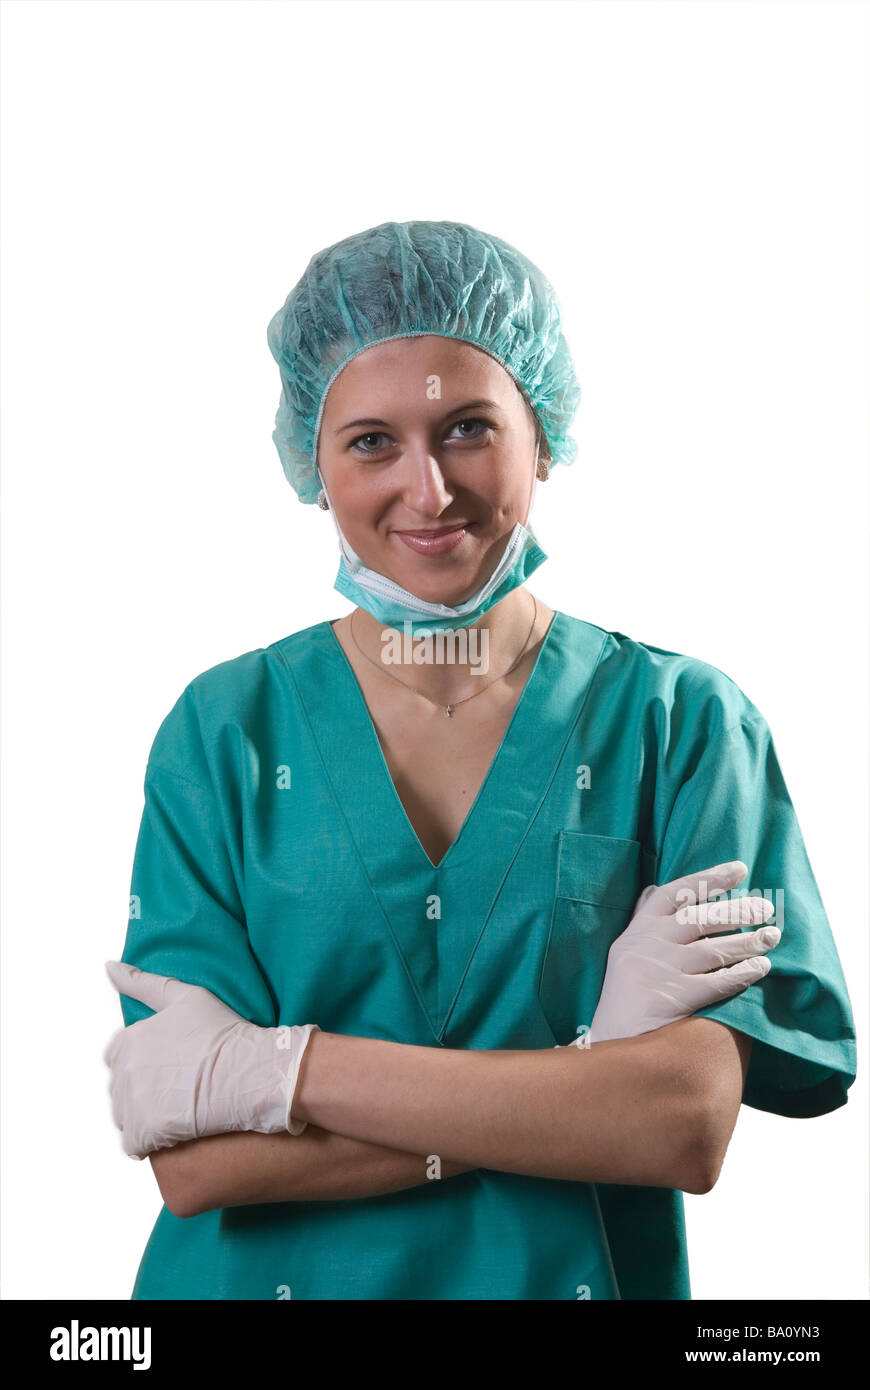 Beautiful young nurse looking at the camera with a smile Stock Photo